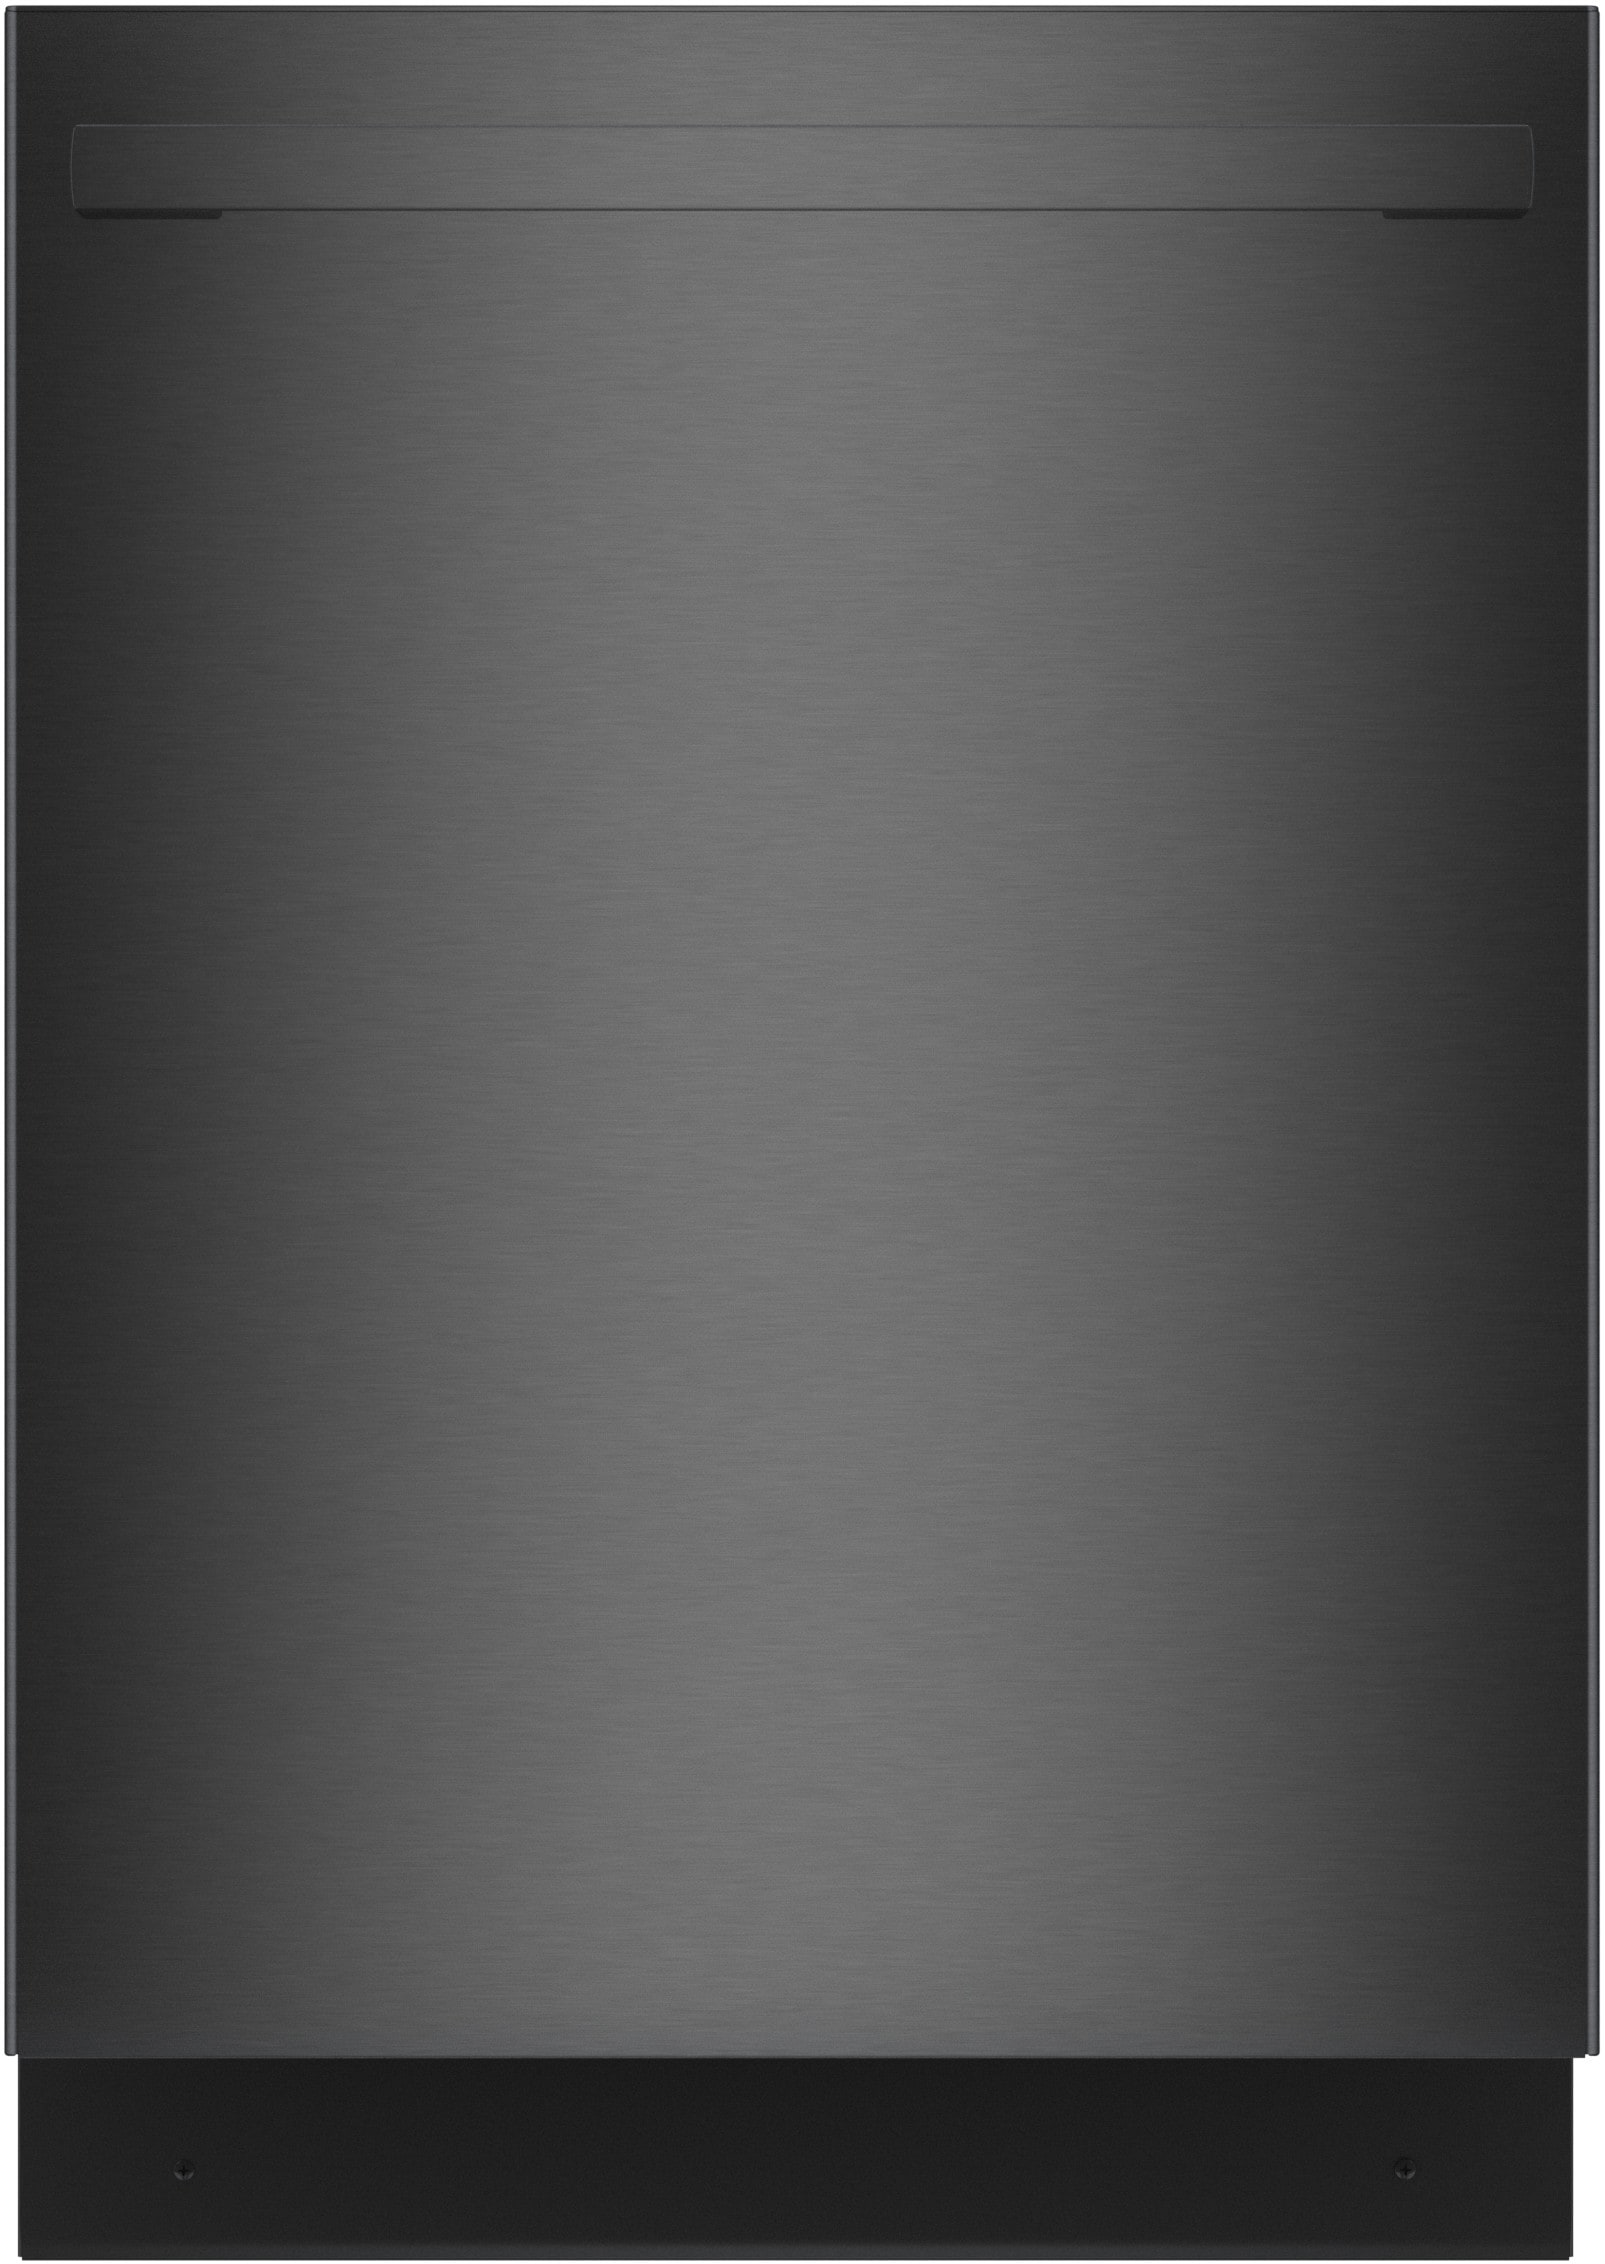 24 in. Top Control Mat Silver Built-in Smart Dishwasher with Finger  Print-Resist and Energy Star